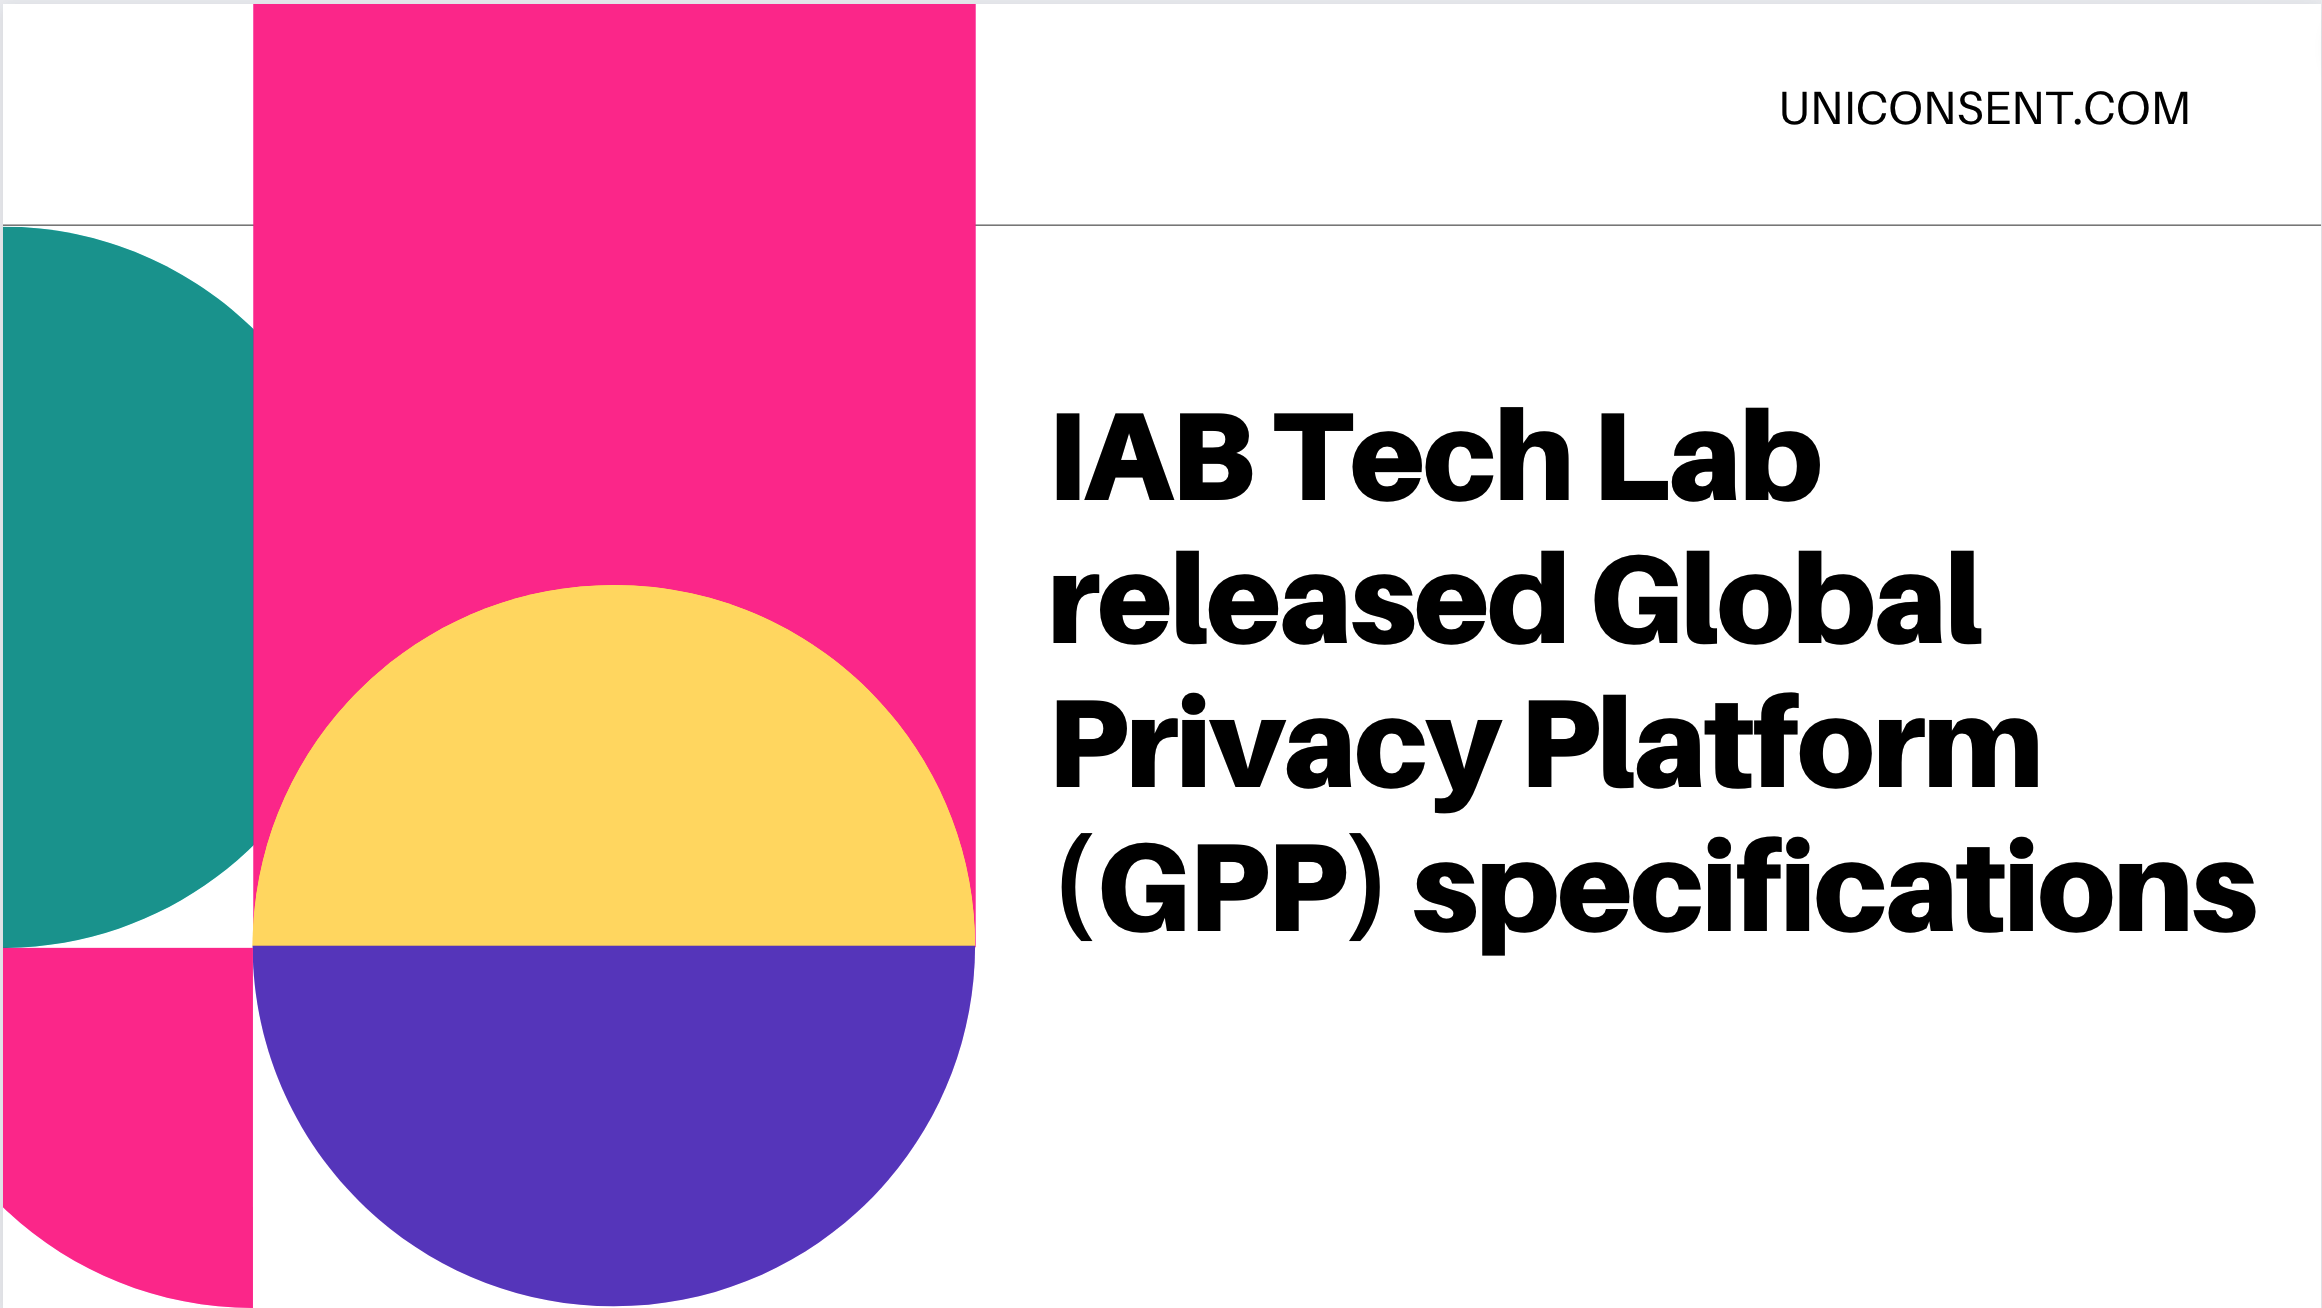 Global Privacy Platform (GPP) is launched by IAB Tech Lab on 1st June 2022.